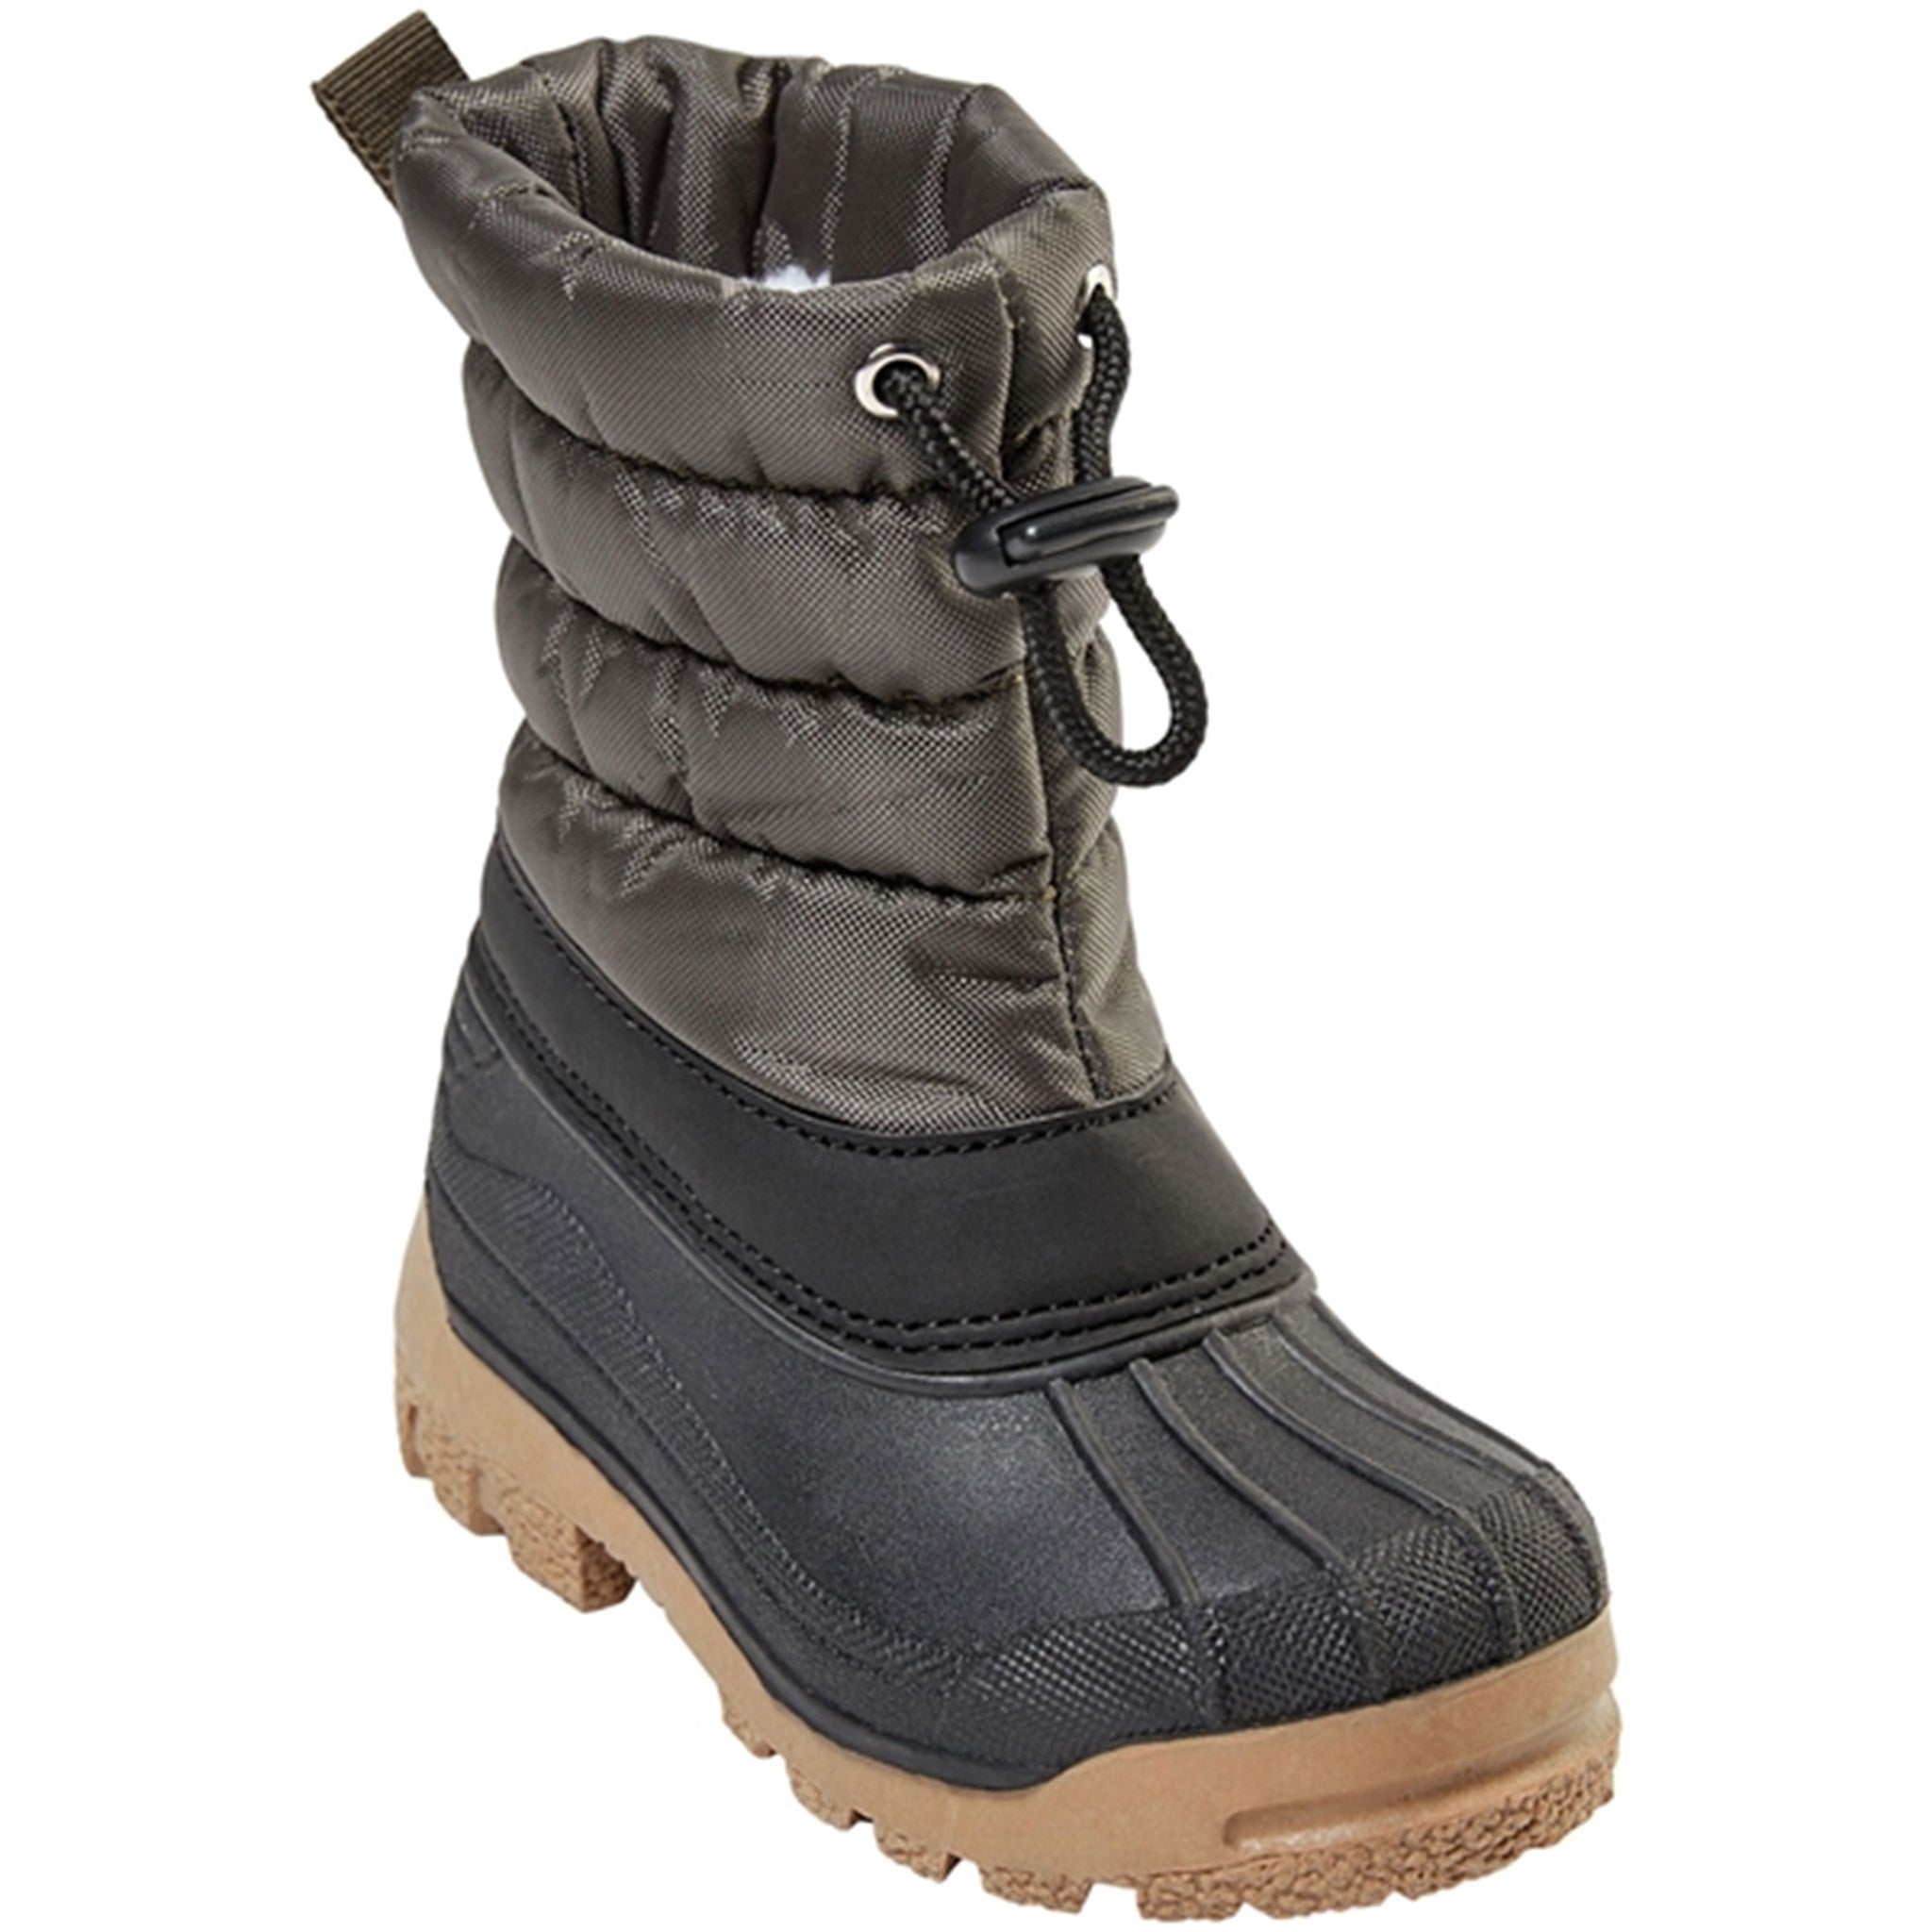 Sofie Schnoor Thermo Boots Army green 4